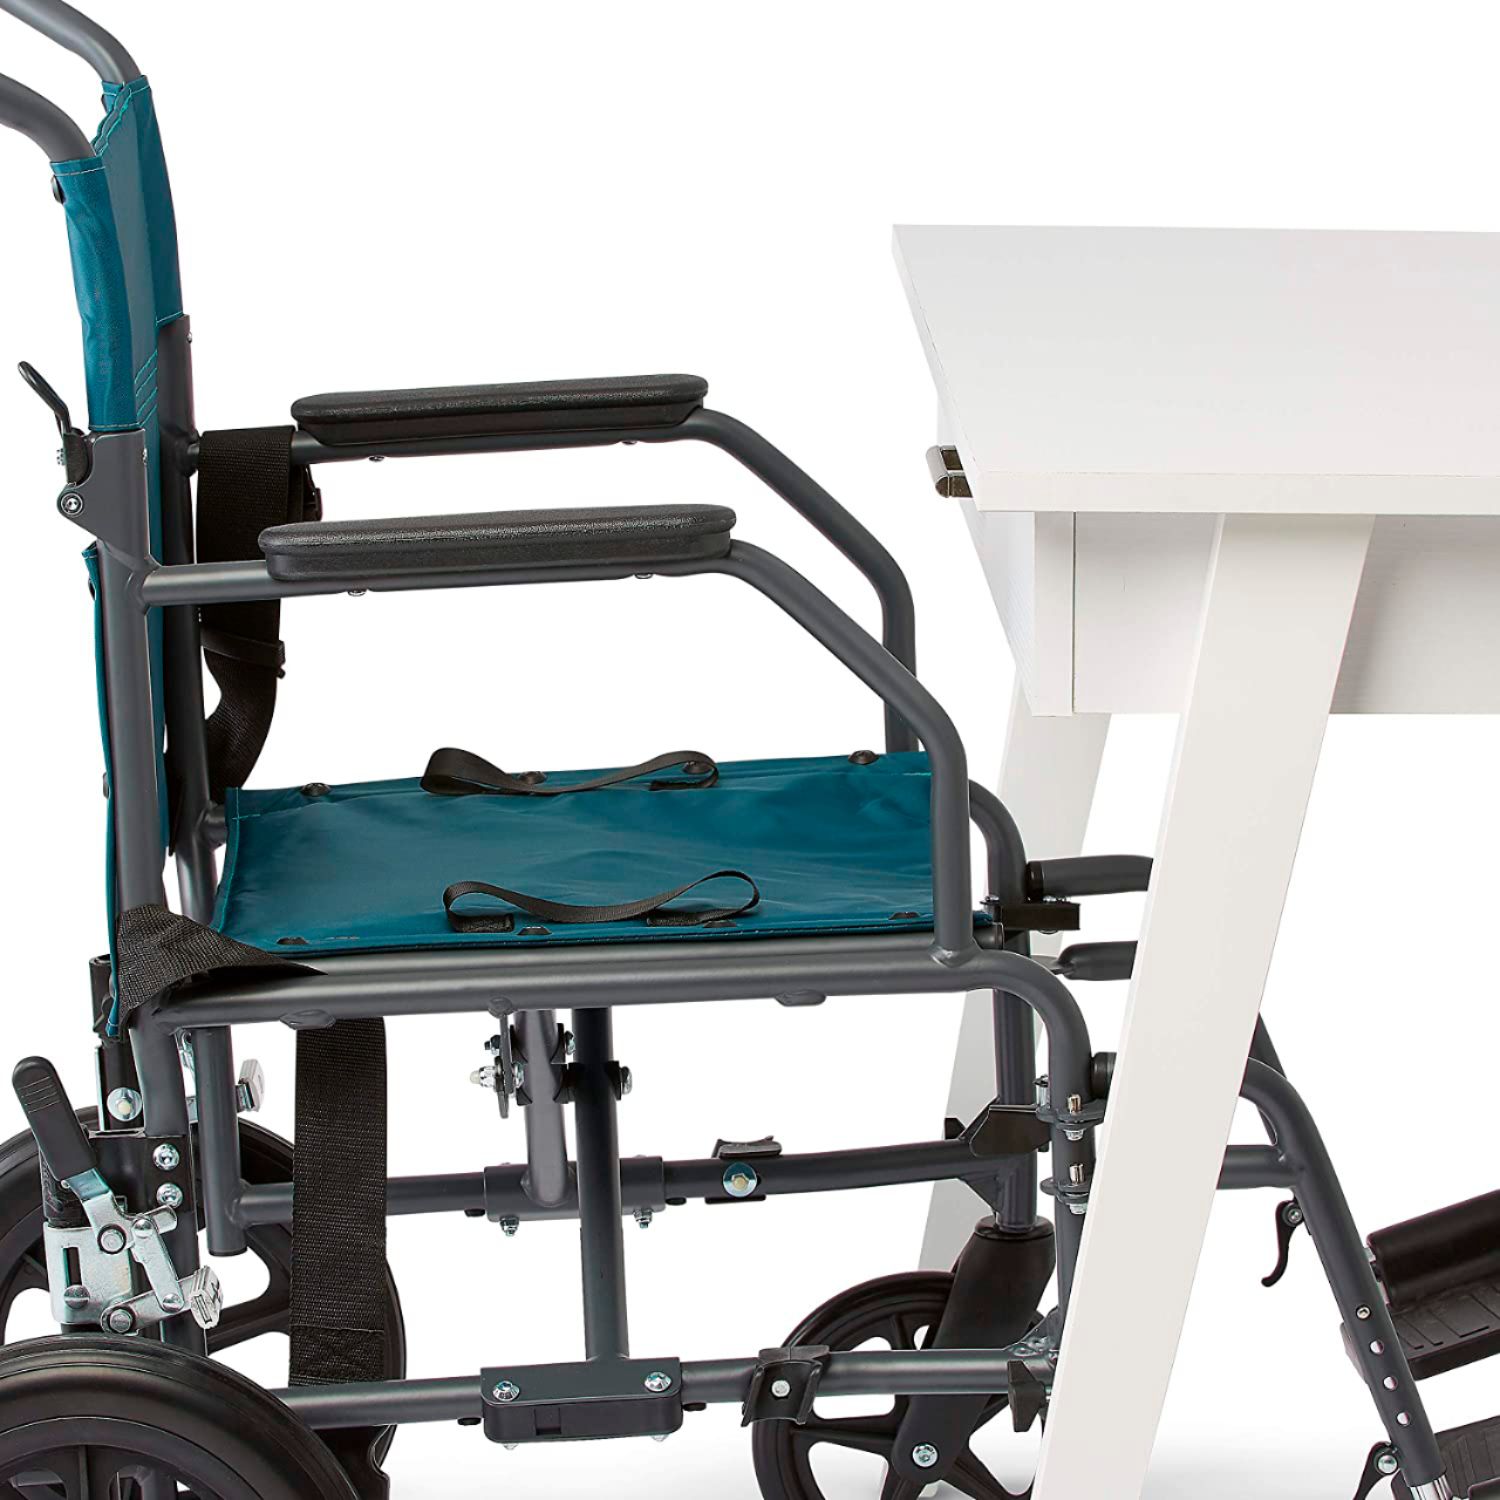 Medline Lightweight Transport Wheelchair with Microban Protection, Folding Chair is Portable, 19" Seat, Teal - Teal